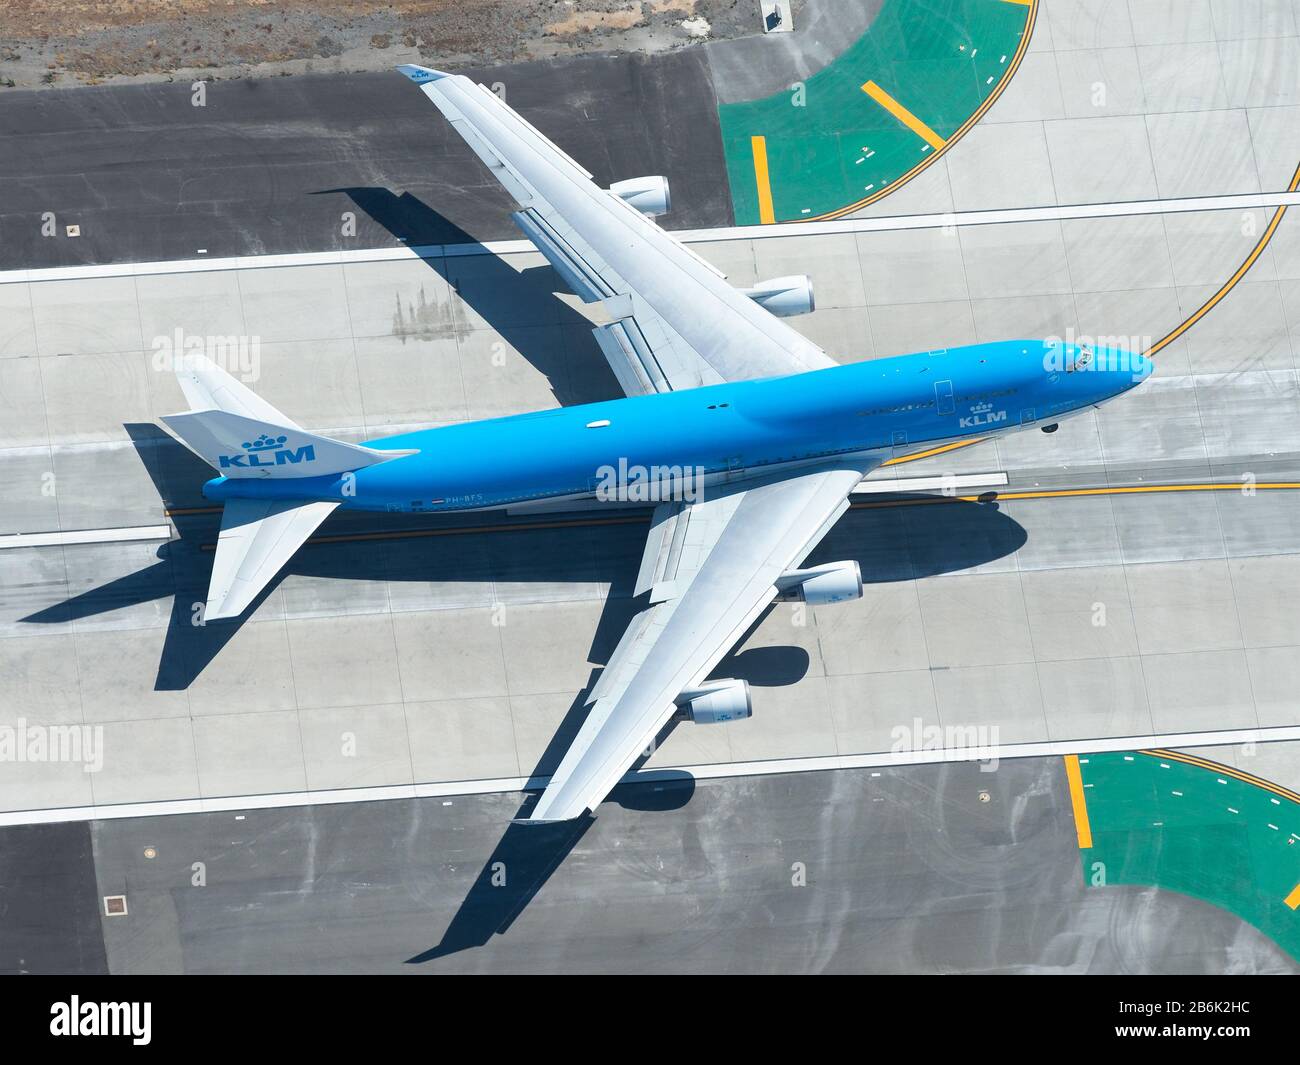 Aerial view of Royal Dutch Airlines Boeing 747 departure from LAX airport. KLM B747 aircraft taking off. Jumbo airplane model being retired by KLM. Stock Photo